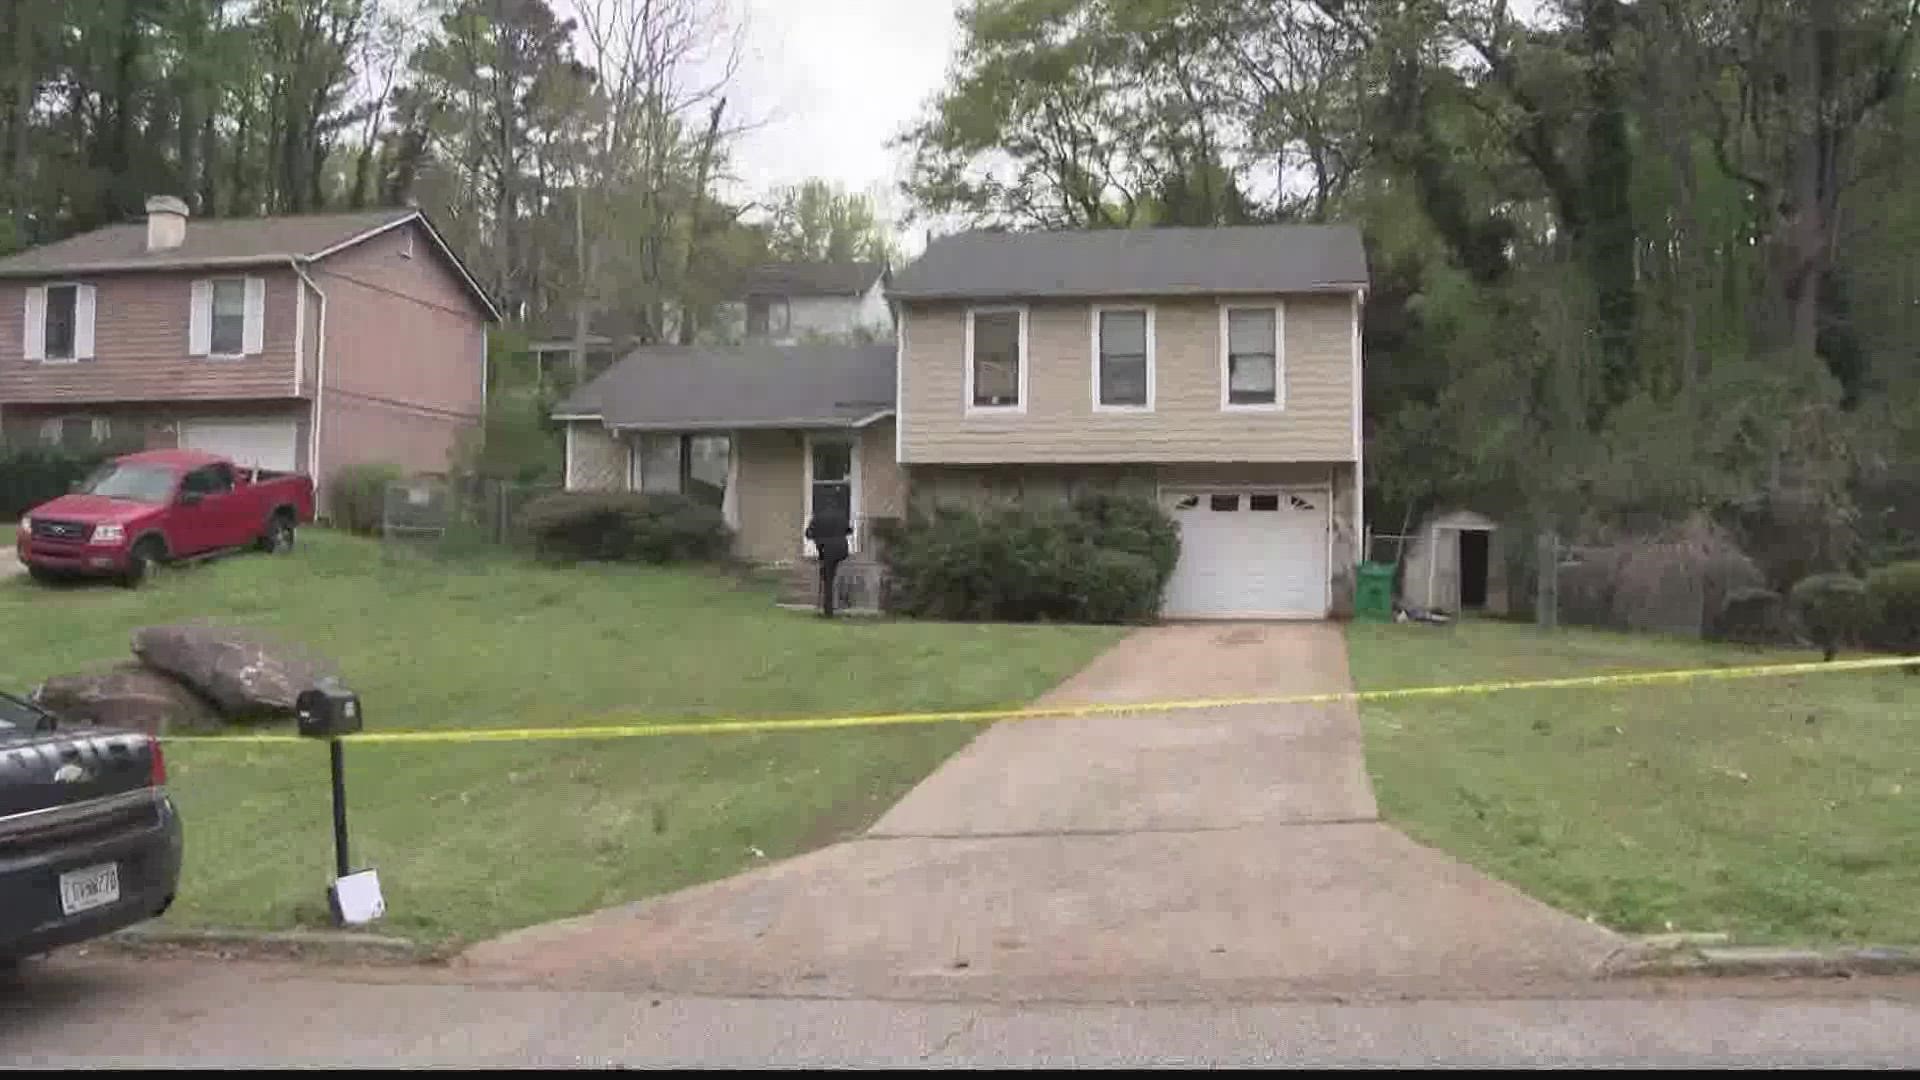 The boy's brother pulled the trigger by accident, according to police.